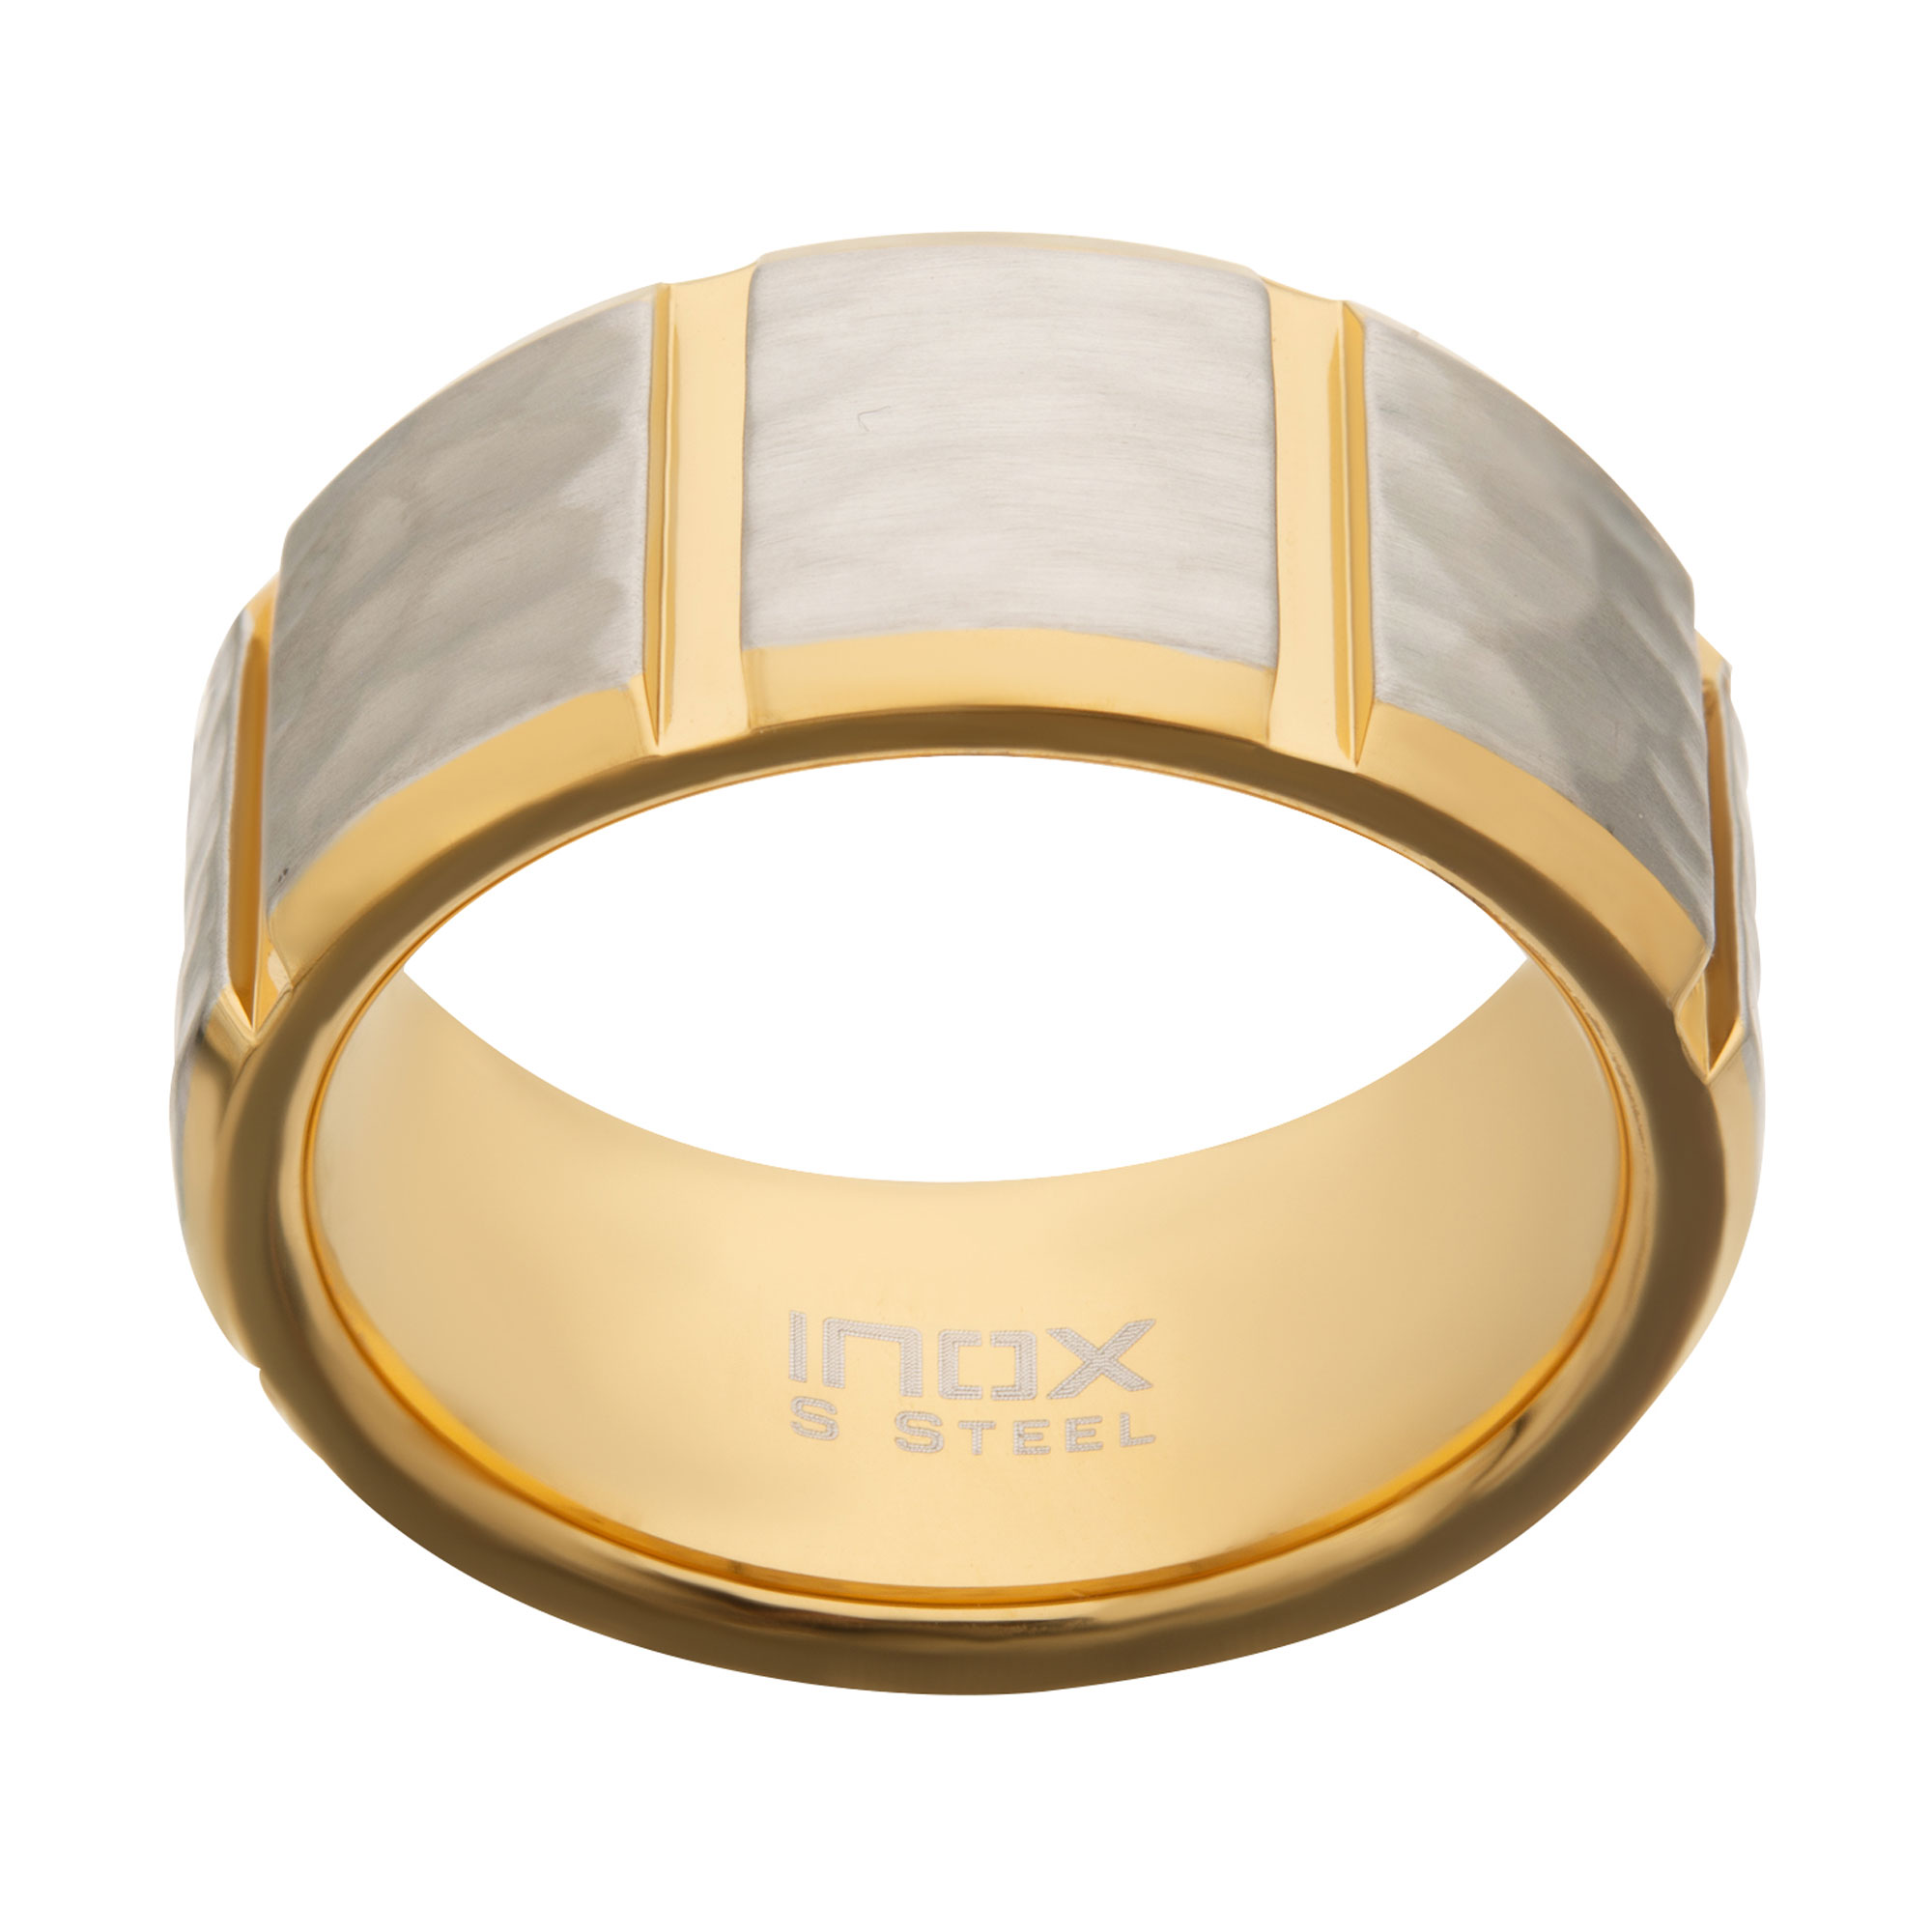 Gold Plated and Stainless Steel Hammered Finish Ring Image 2 Ken Walker Jewelers Gig Harbor, WA